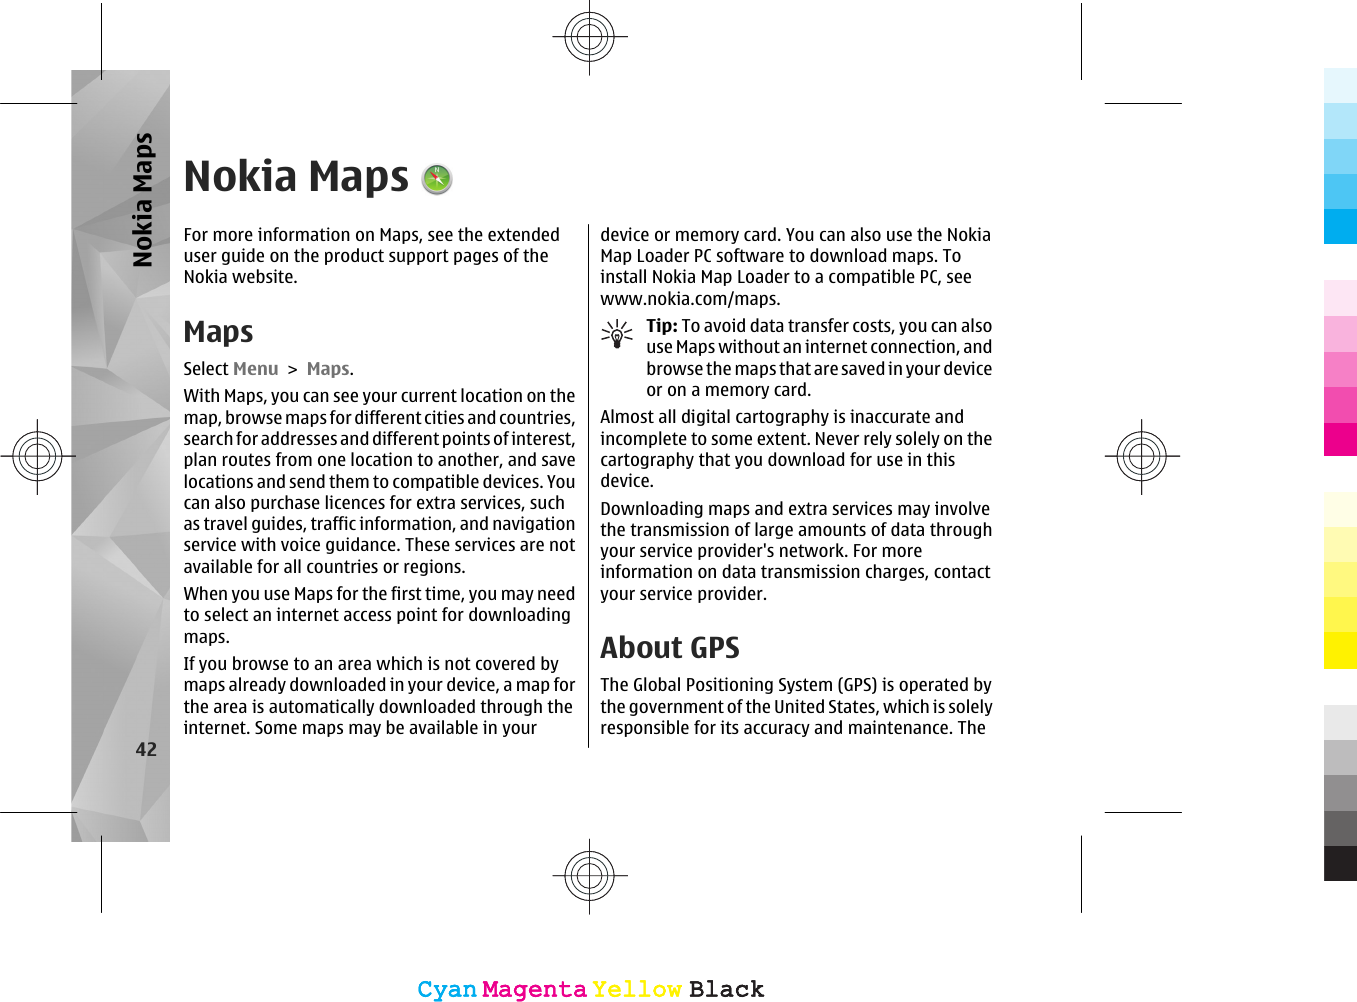 Nokia MapsFor more information on Maps, see the extendeduser guide on the product support pages of theNokia website.MapsSelect Menu &gt; Maps.With Maps, you can see your current location on themap, browse maps for different cities and countries,search for addresses and different points of interest,plan routes from one location to another, and savelocations and send them to compatible devices. Youcan also purchase licences for extra services, suchas travel guides, traffic information, and navigationservice with voice guidance. These services are notavailable for all countries or regions.When you use Maps for the first time, you may needto select an internet access point for downloadingmaps.If you browse to an area which is not covered bymaps already downloaded in your device, a map forthe area is automatically downloaded through theinternet. Some maps may be available in yourdevice or memory card. You can also use the NokiaMap Loader PC software to download maps. Toinstall Nokia Map Loader to a compatible PC, seewww.nokia.com/maps.Tip: To avoid data transfer costs, you can alsouse Maps without an internet connection, andbrowse the maps that are saved in your deviceor on a memory card.Almost all digital cartography is inaccurate andincomplete to some extent. Never rely solely on thecartography that you download for use in thisdevice.Downloading maps and extra services may involvethe transmission of large amounts of data throughyour service provider&apos;s network. For moreinformation on data transmission charges, contactyour service provider.About GPSThe Global Positioning System (GPS) is operated bythe government of the United States, which is solelyresponsible for its accuracy and maintenance. The42Nokia MapsCyanCyanMagentaMagentaYellowYellowBlackBlackCyanCyanMagentaMagentaYellowYellowBlackBlack